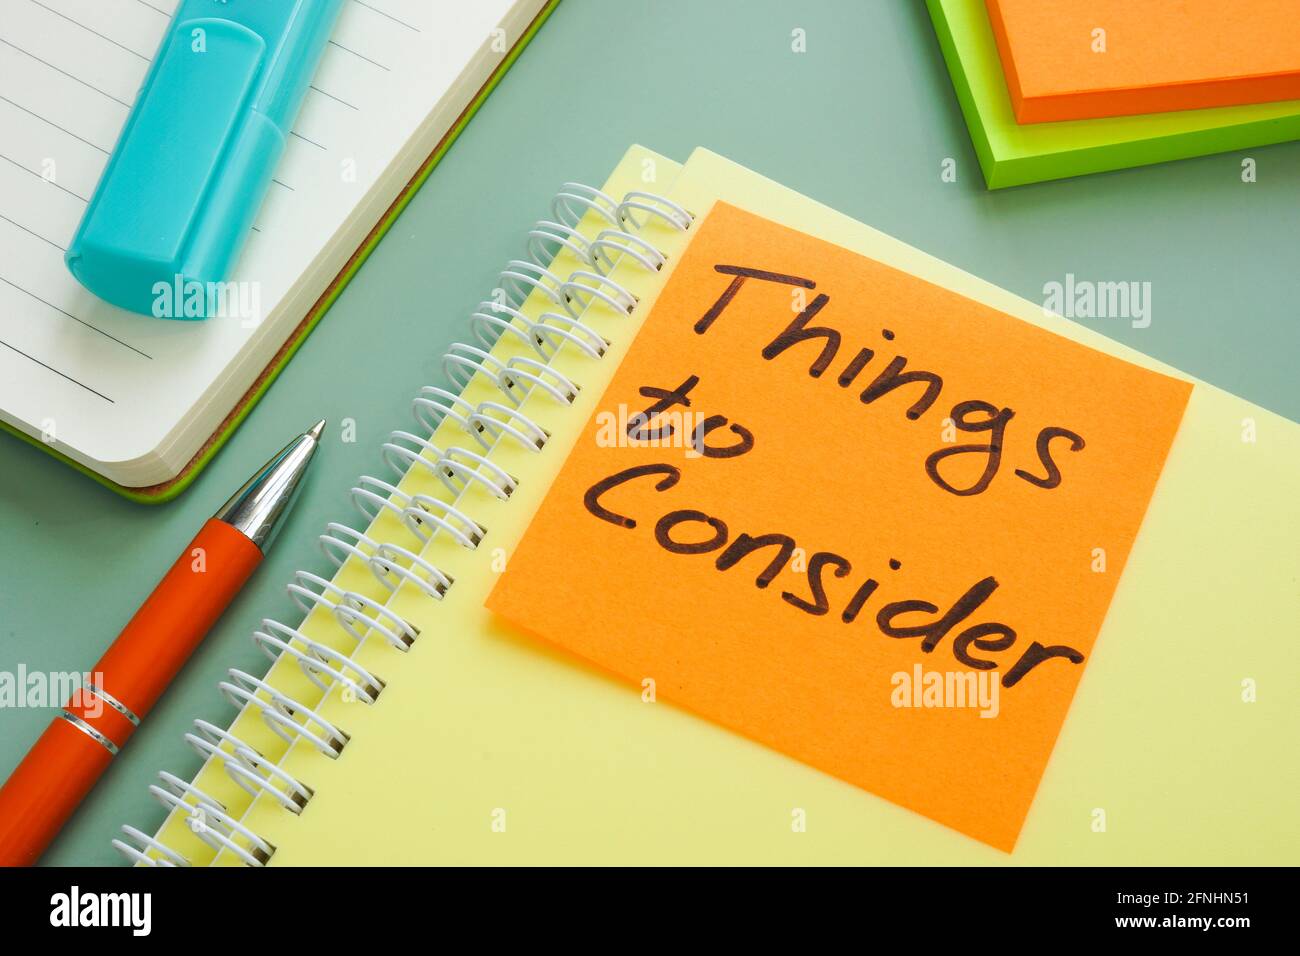 Things to consider memo on the stack of documents. Stock Photo